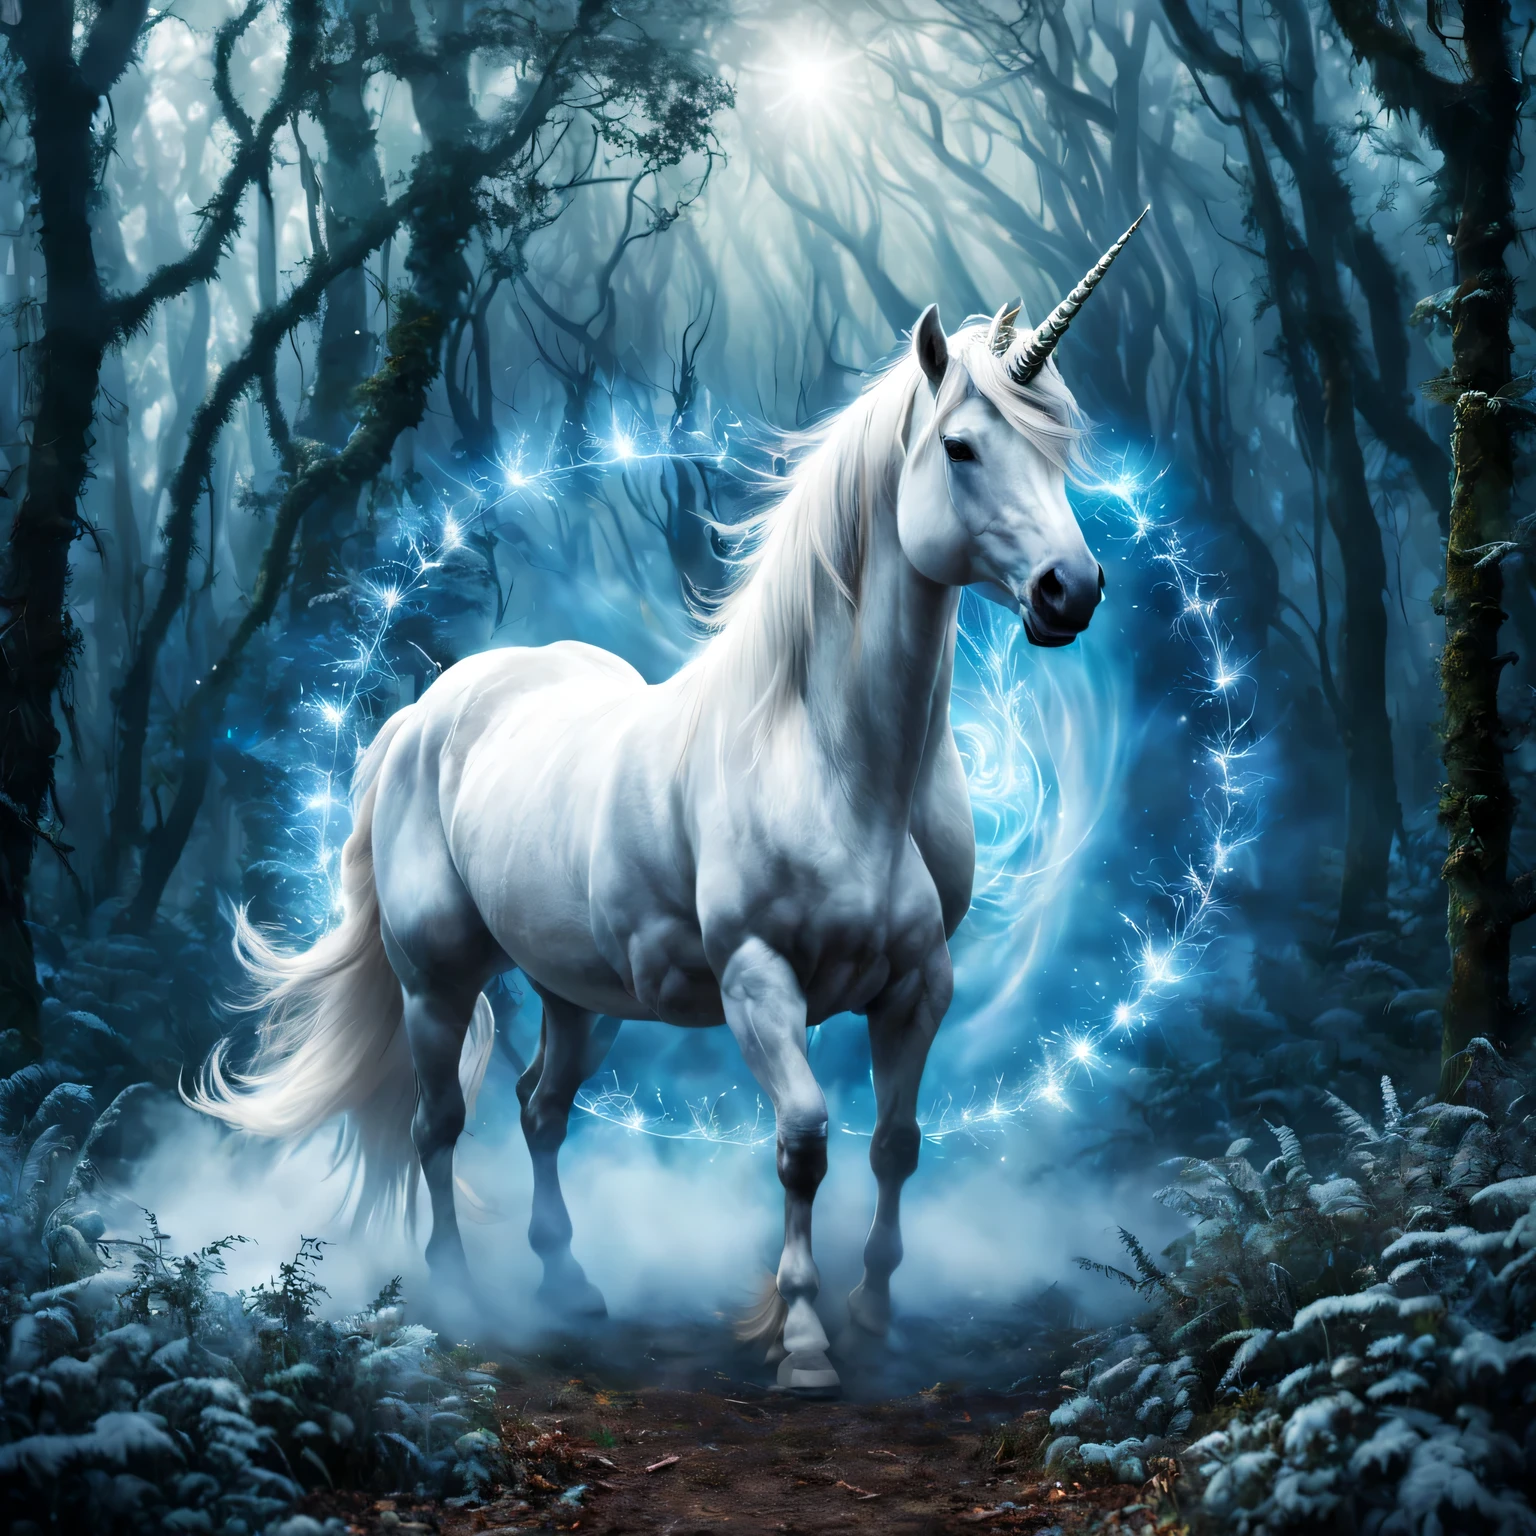 Double exposure photo, showing a TV and a unicorn coming out of it., TV on the table, a beautiful white unicorn with its details and clear textures comes out of the TV and spreads a magical blue mist and blue magic sparks around, outline of the fairy world of a unicorn, the texture of the skin and fur is visible in the magical blue mist. The unicorn is clearly shown., pay attention to the unicorn&#39;s emotions and expressive eyes, unicorn looks at viewer, great depth of field, a high resolution, Extremely realistic, extremely detailed, cinematic treatment, HDR, photorealistic, the masterpiece, (double exposure:1,3)